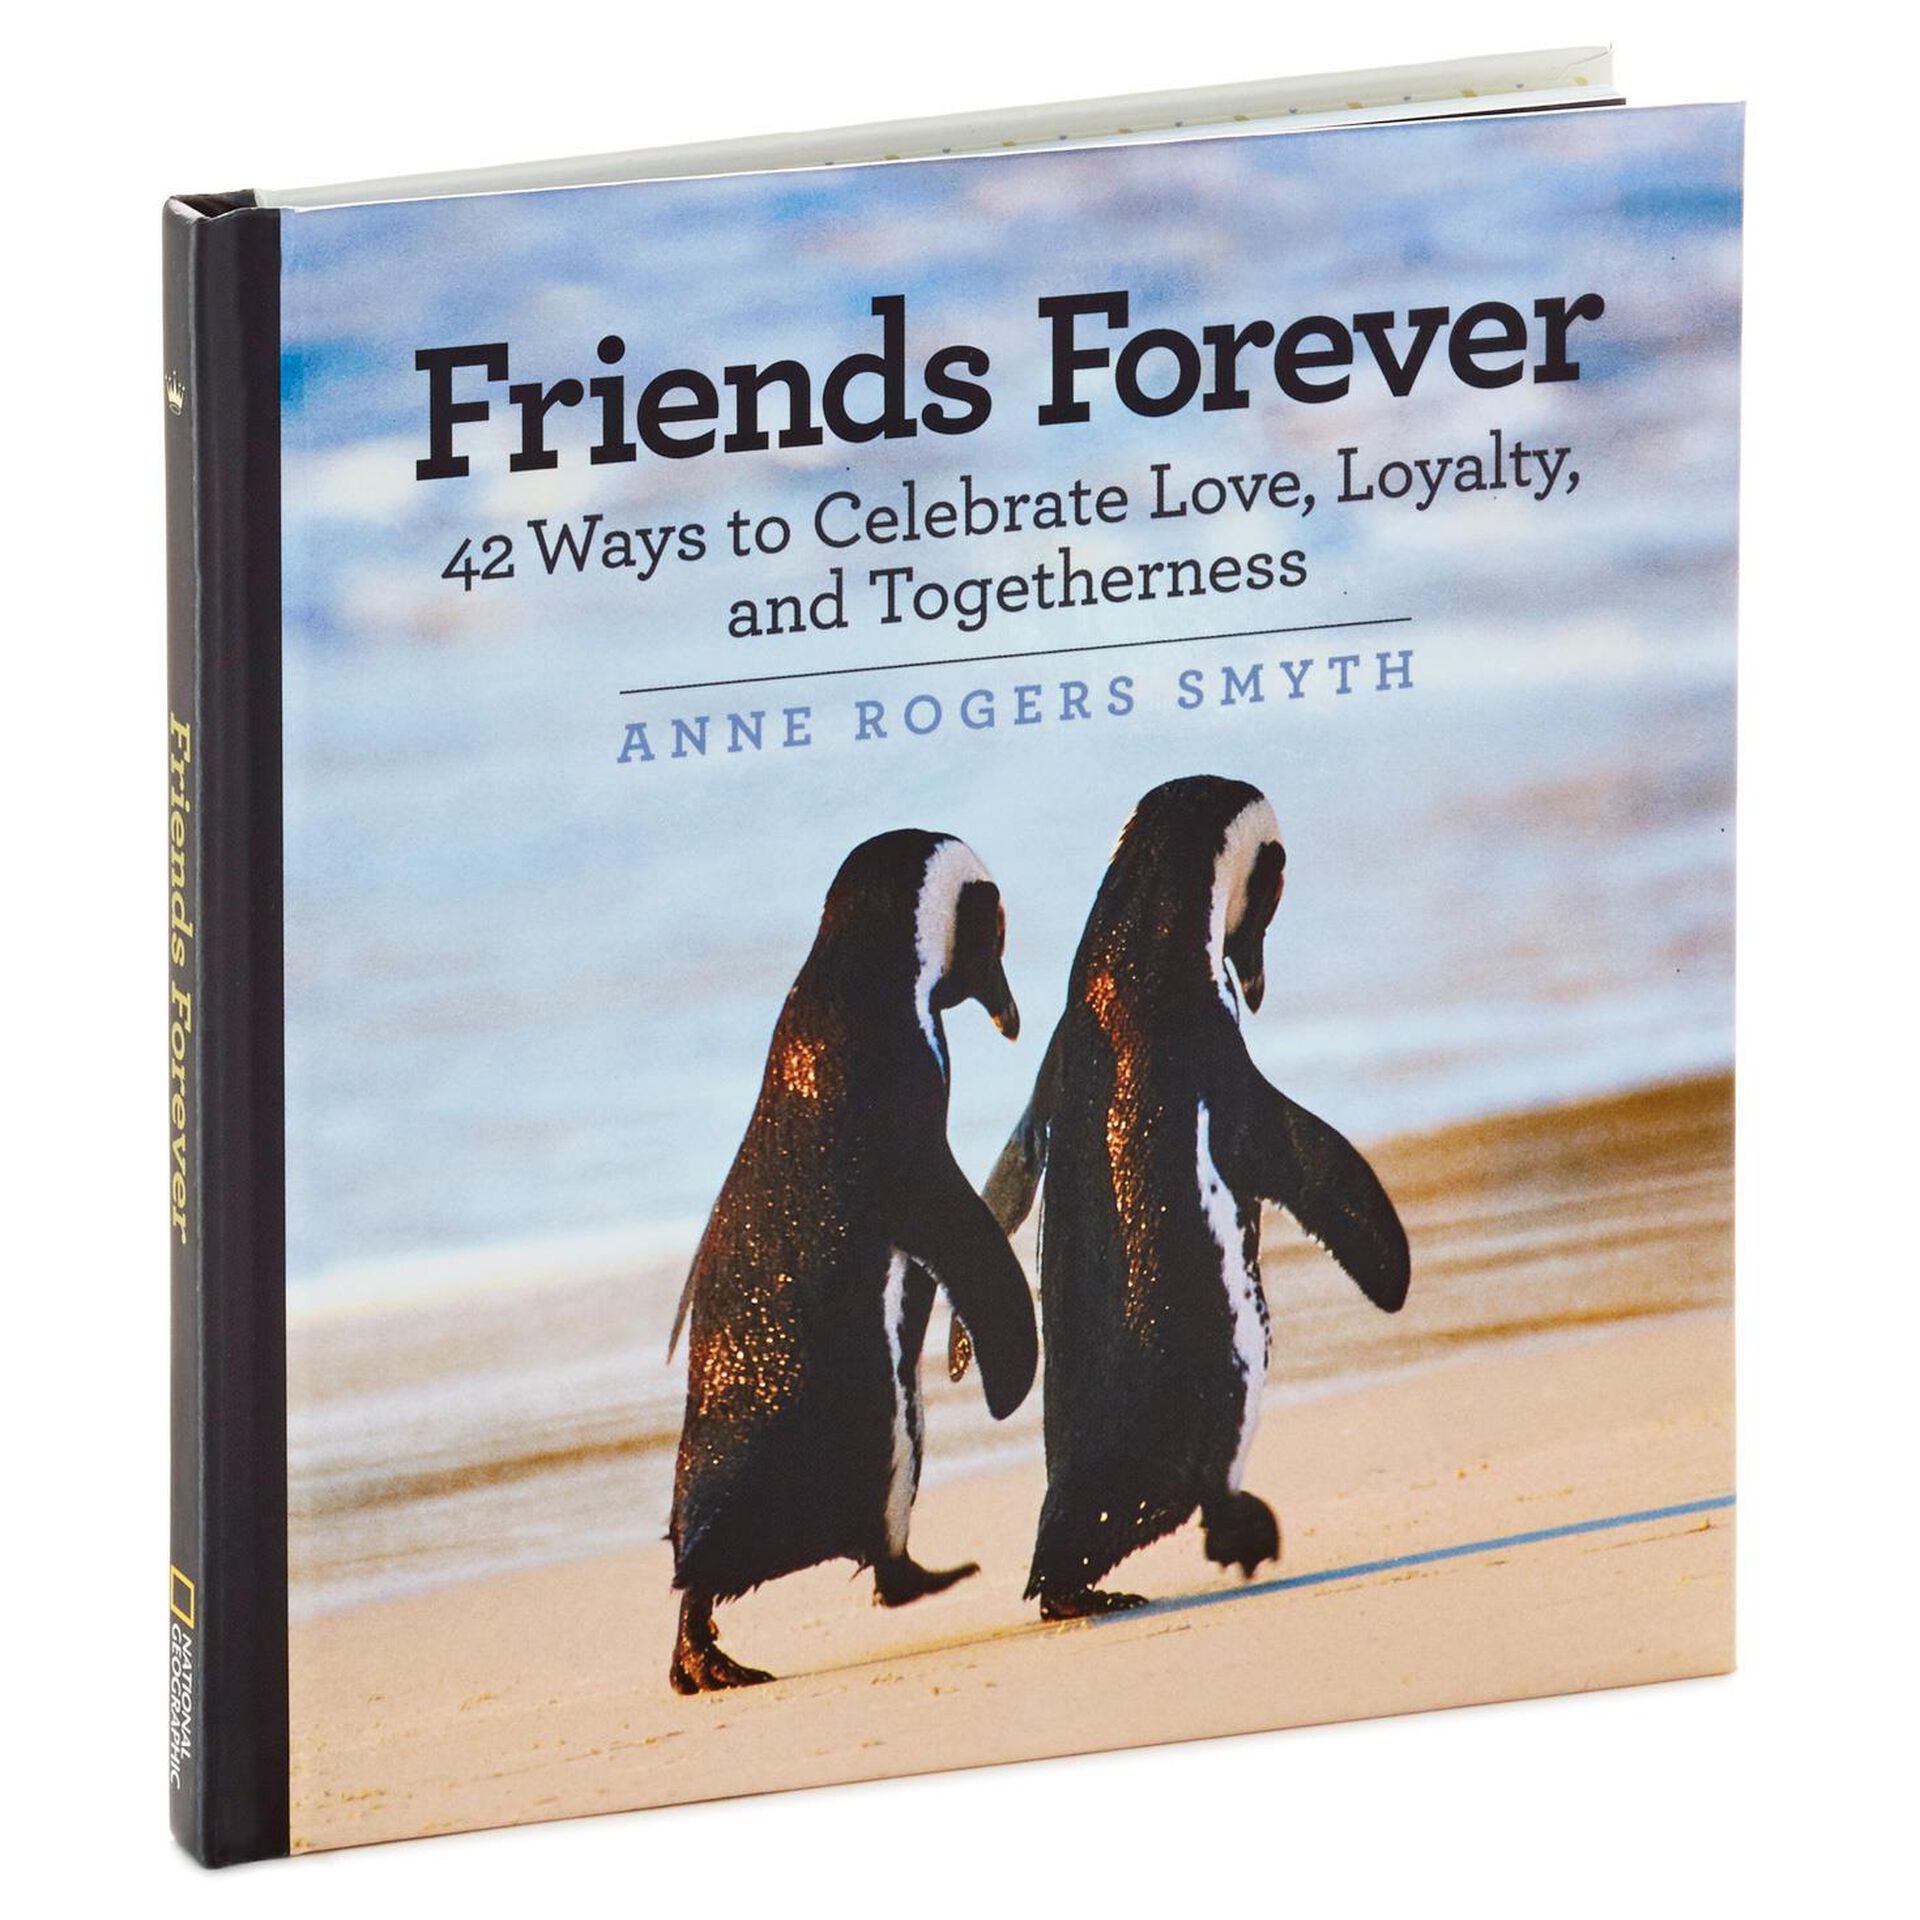 Friends Forever: 42 Ways to Celebrate Love, Loyalty and Togetherness ...